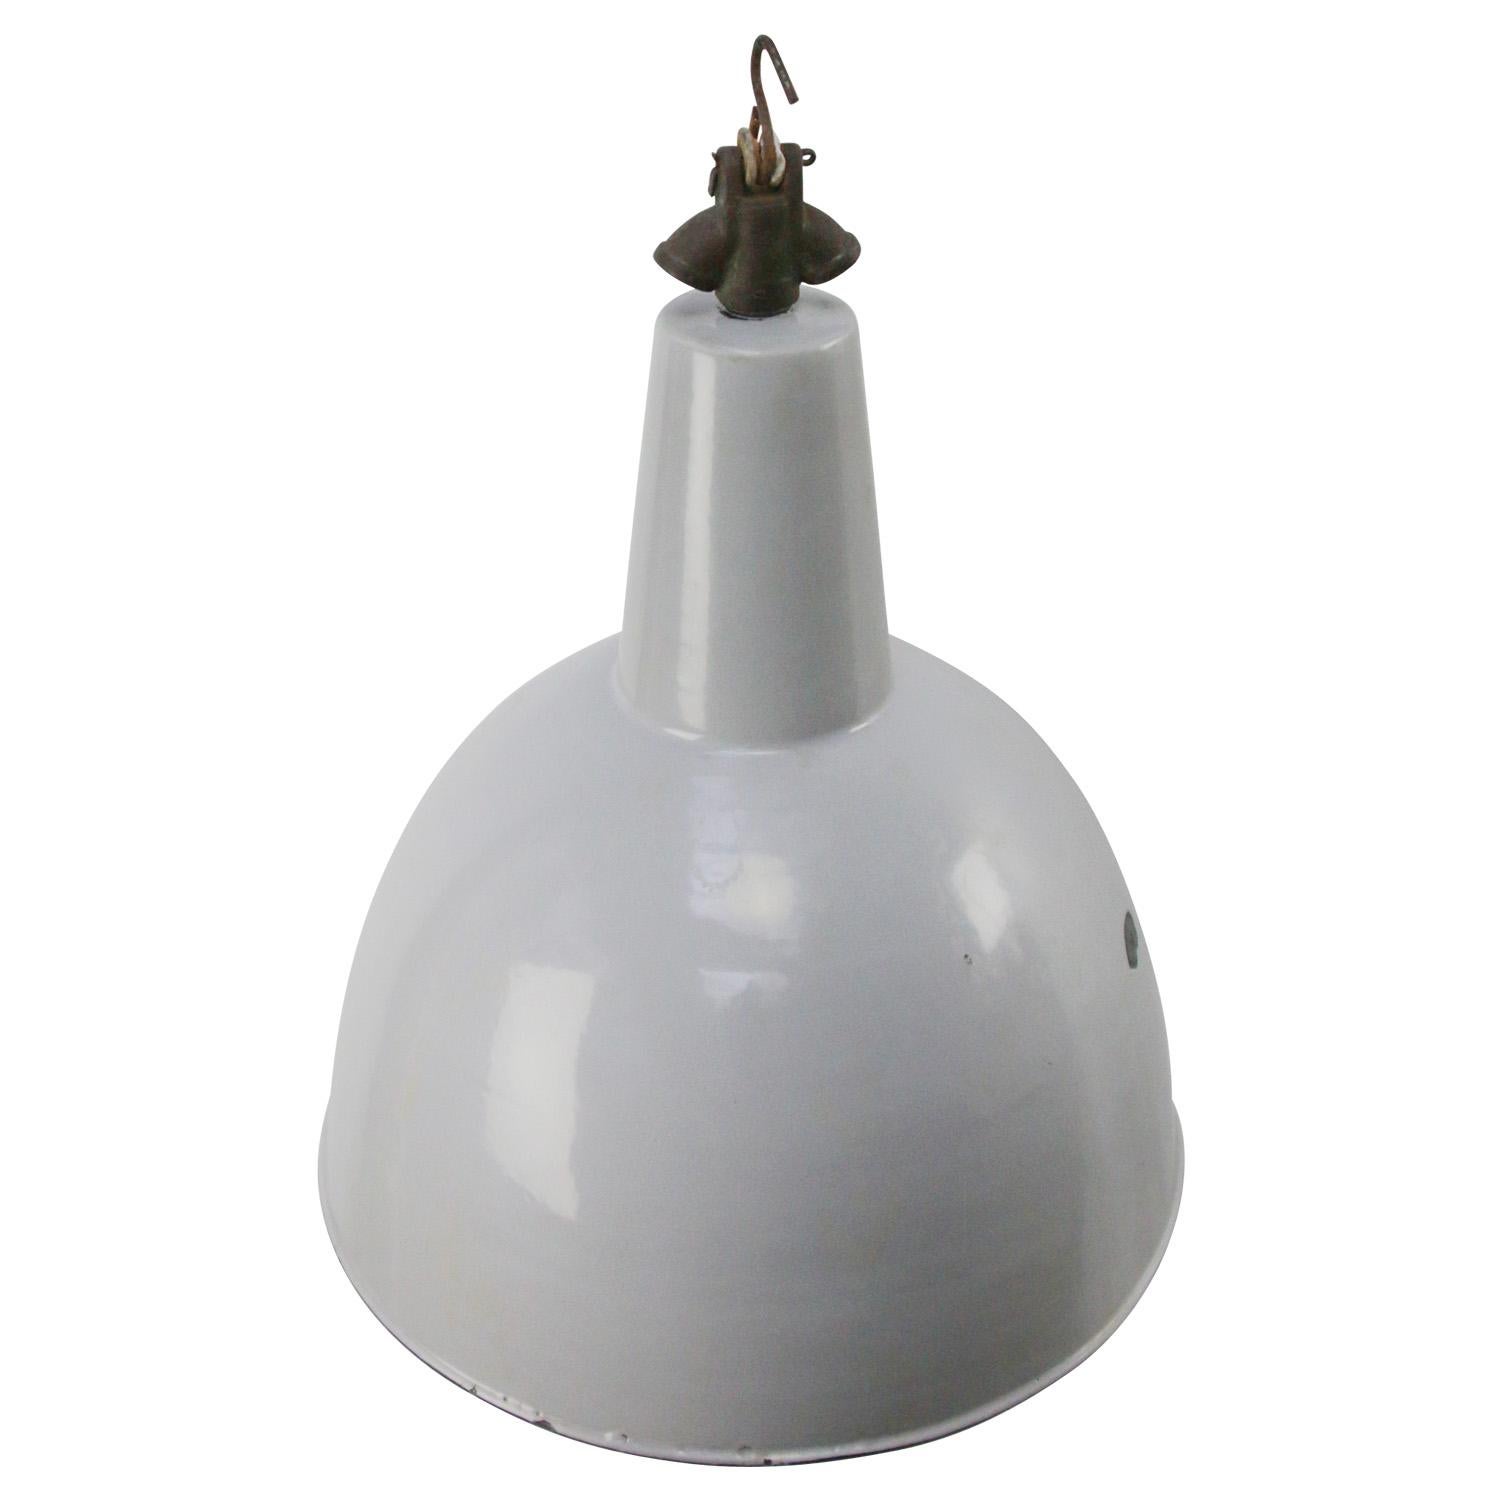 Dutch grey industrial factory light by Philips
Thick quality Enamel.
Used in warehouses and factories. 

E27/E26

Weight: 2.40 kg / 5.3 lb

Priced per individual item. All lamps have been made suitable by international standards for